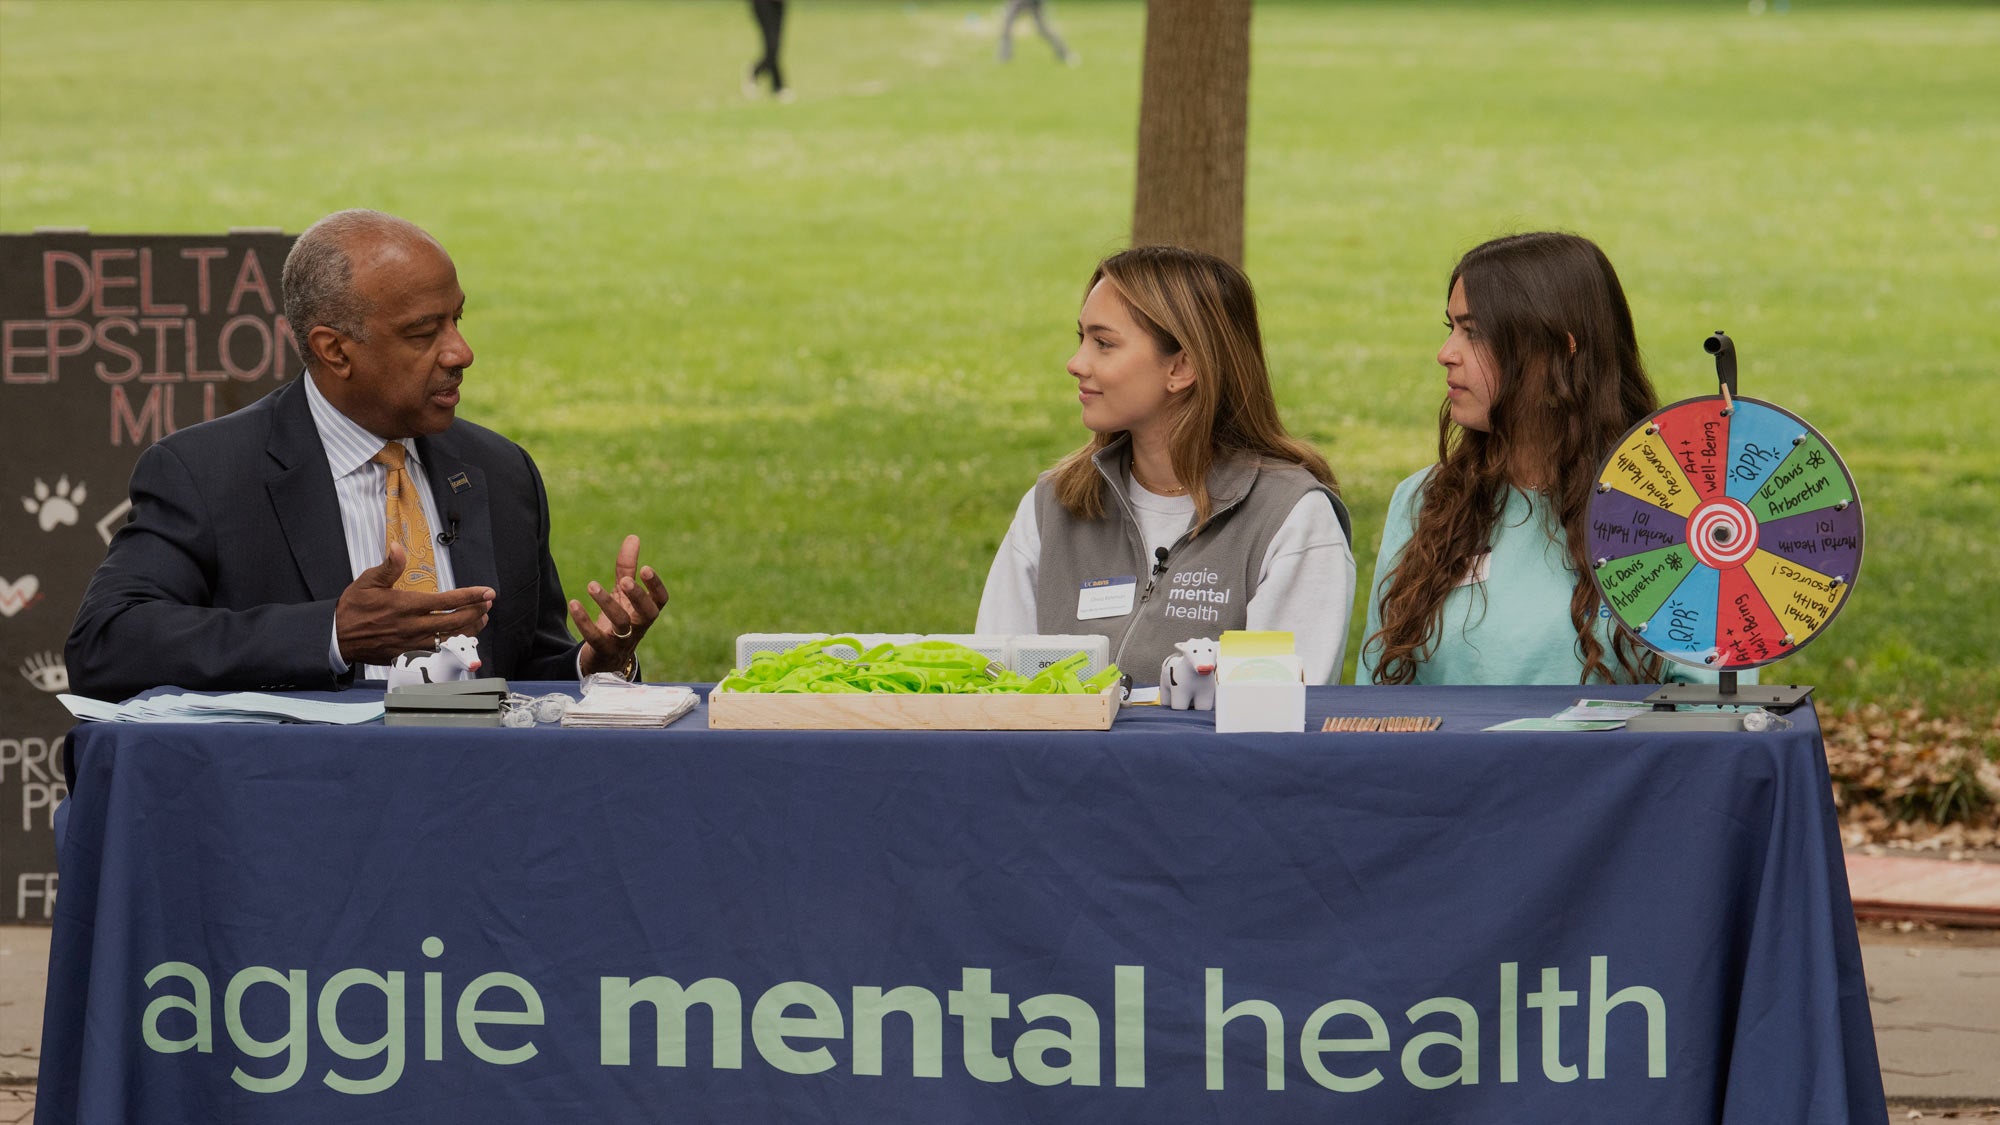 UC Davis Chancellor Gary S. May engages with students at the Aggie Mental Health booth to discuss the importance of student wellness on campus. (Gregory Urquiaga/UC Davis)